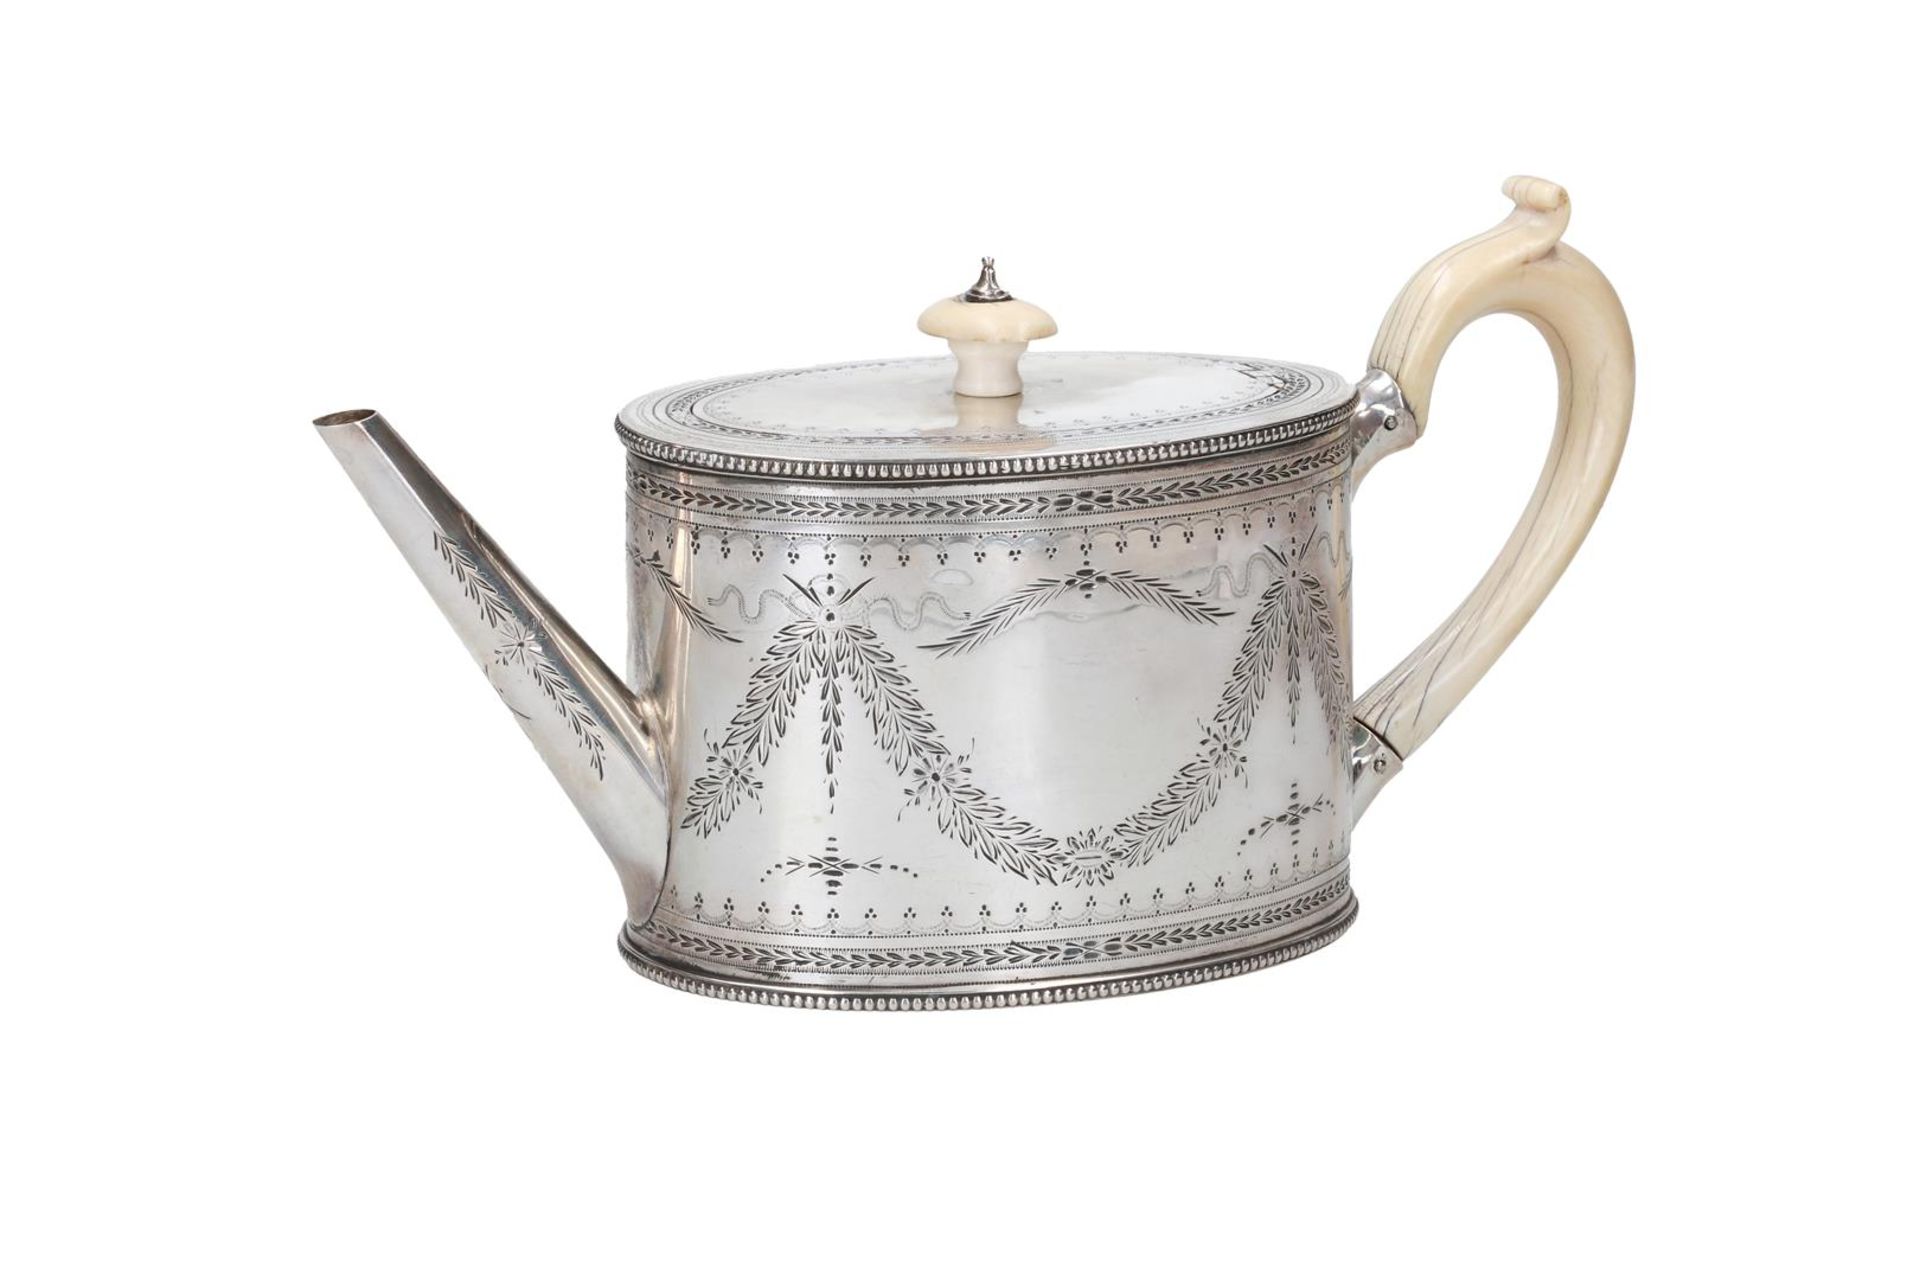 An oval first grade silver teapot with ivory handle and knob. With engraving of garlands. England, 1